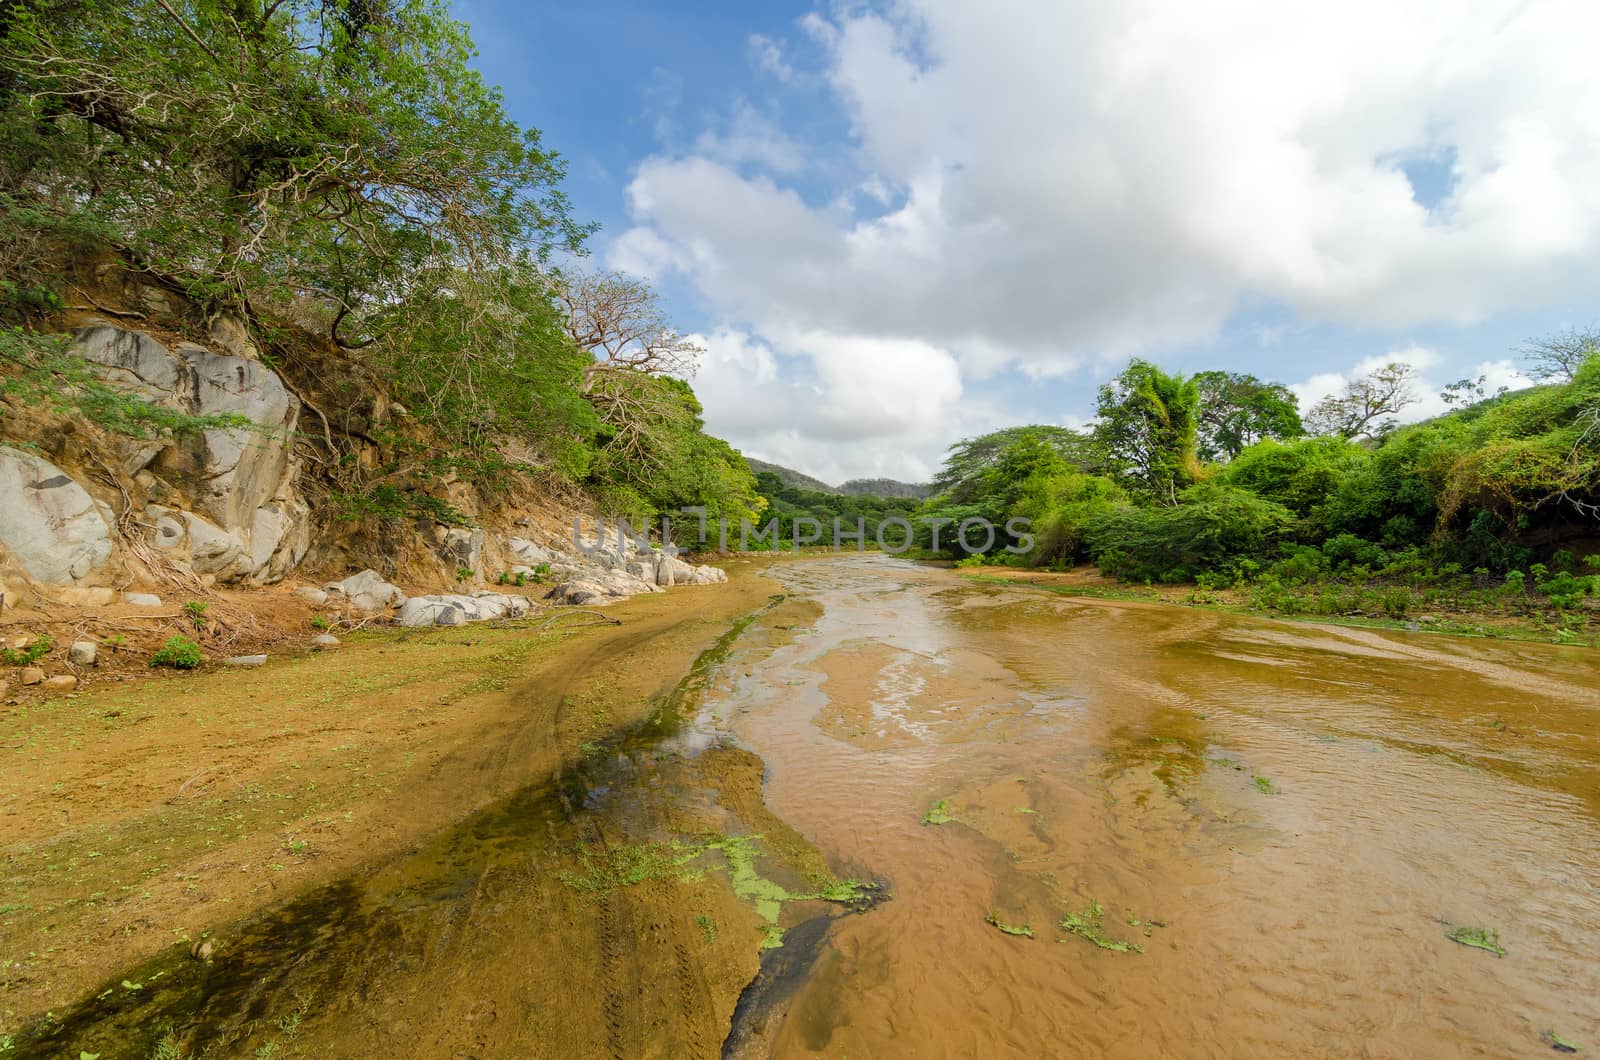 Shallow almost dry river bed in Macuira National Park in La Guajira, Colombia